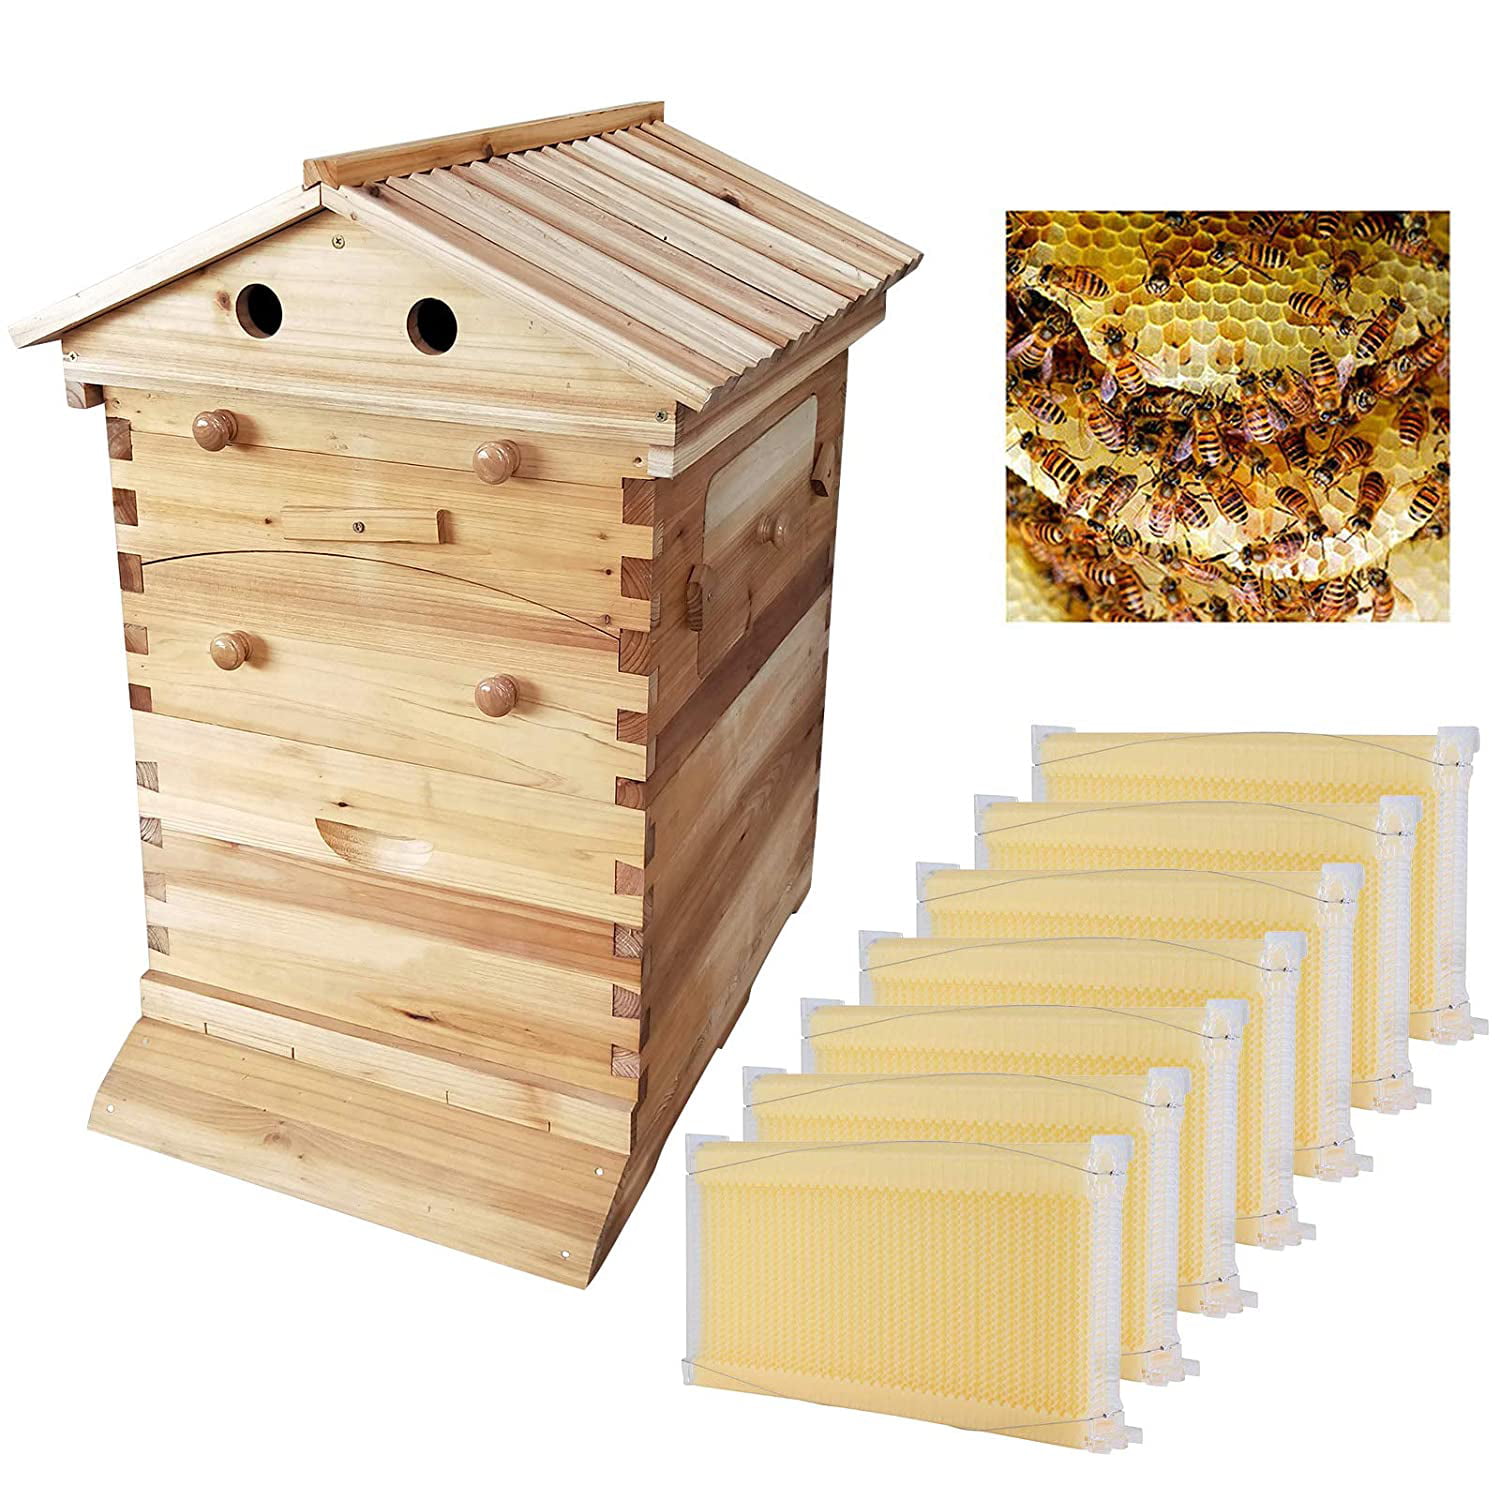 【US】Chinese fir Beekeeping Super Brood Box House Unique Bee Hive Wood House 